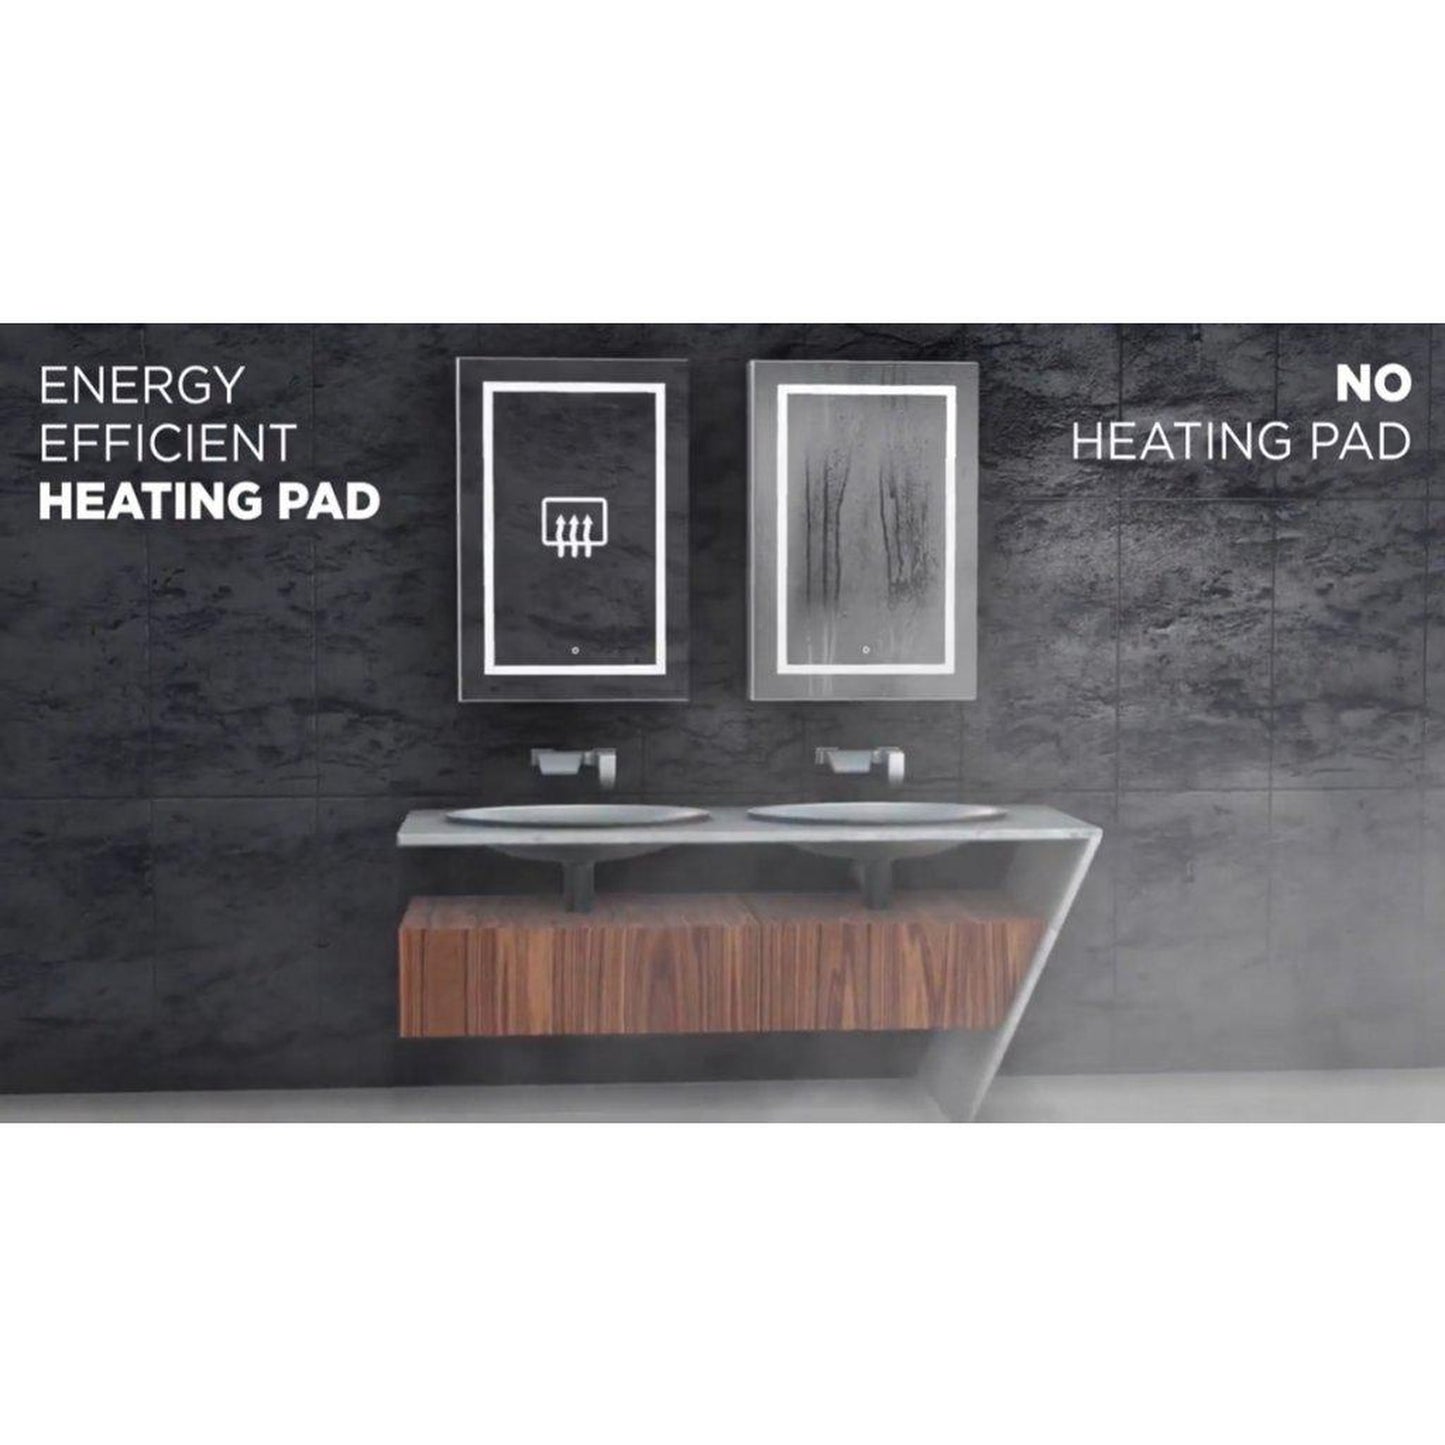 Krugg Reflections Stella 24" x 36" 5000K Rectangular Wall-Mounted Silver-Backed LED Bathroom Vanity Mirror With Built-in Defogger and Dimmer